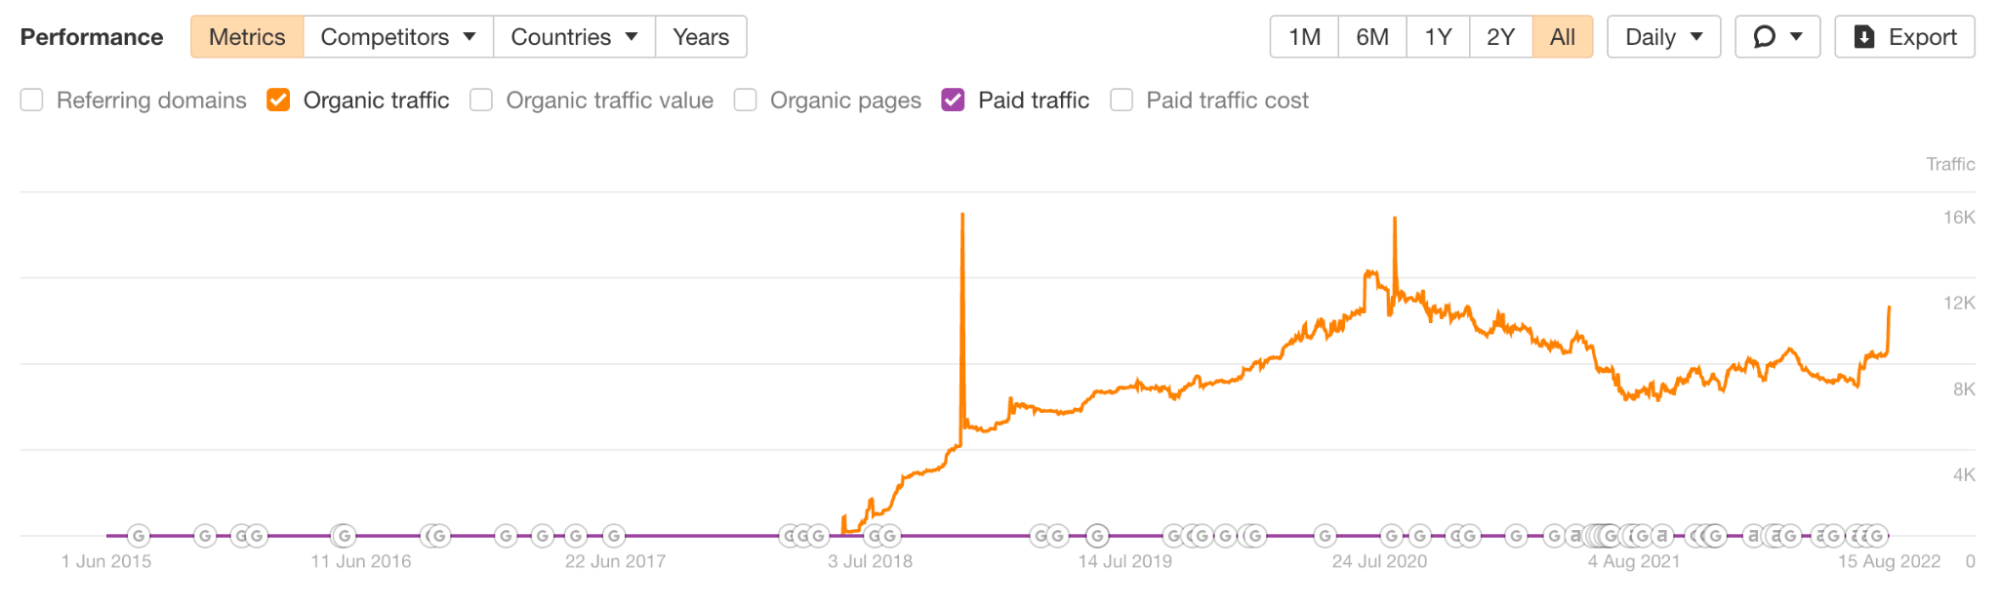 The line chart shows our post on Google's advanced search operators getting tons of organic traffic